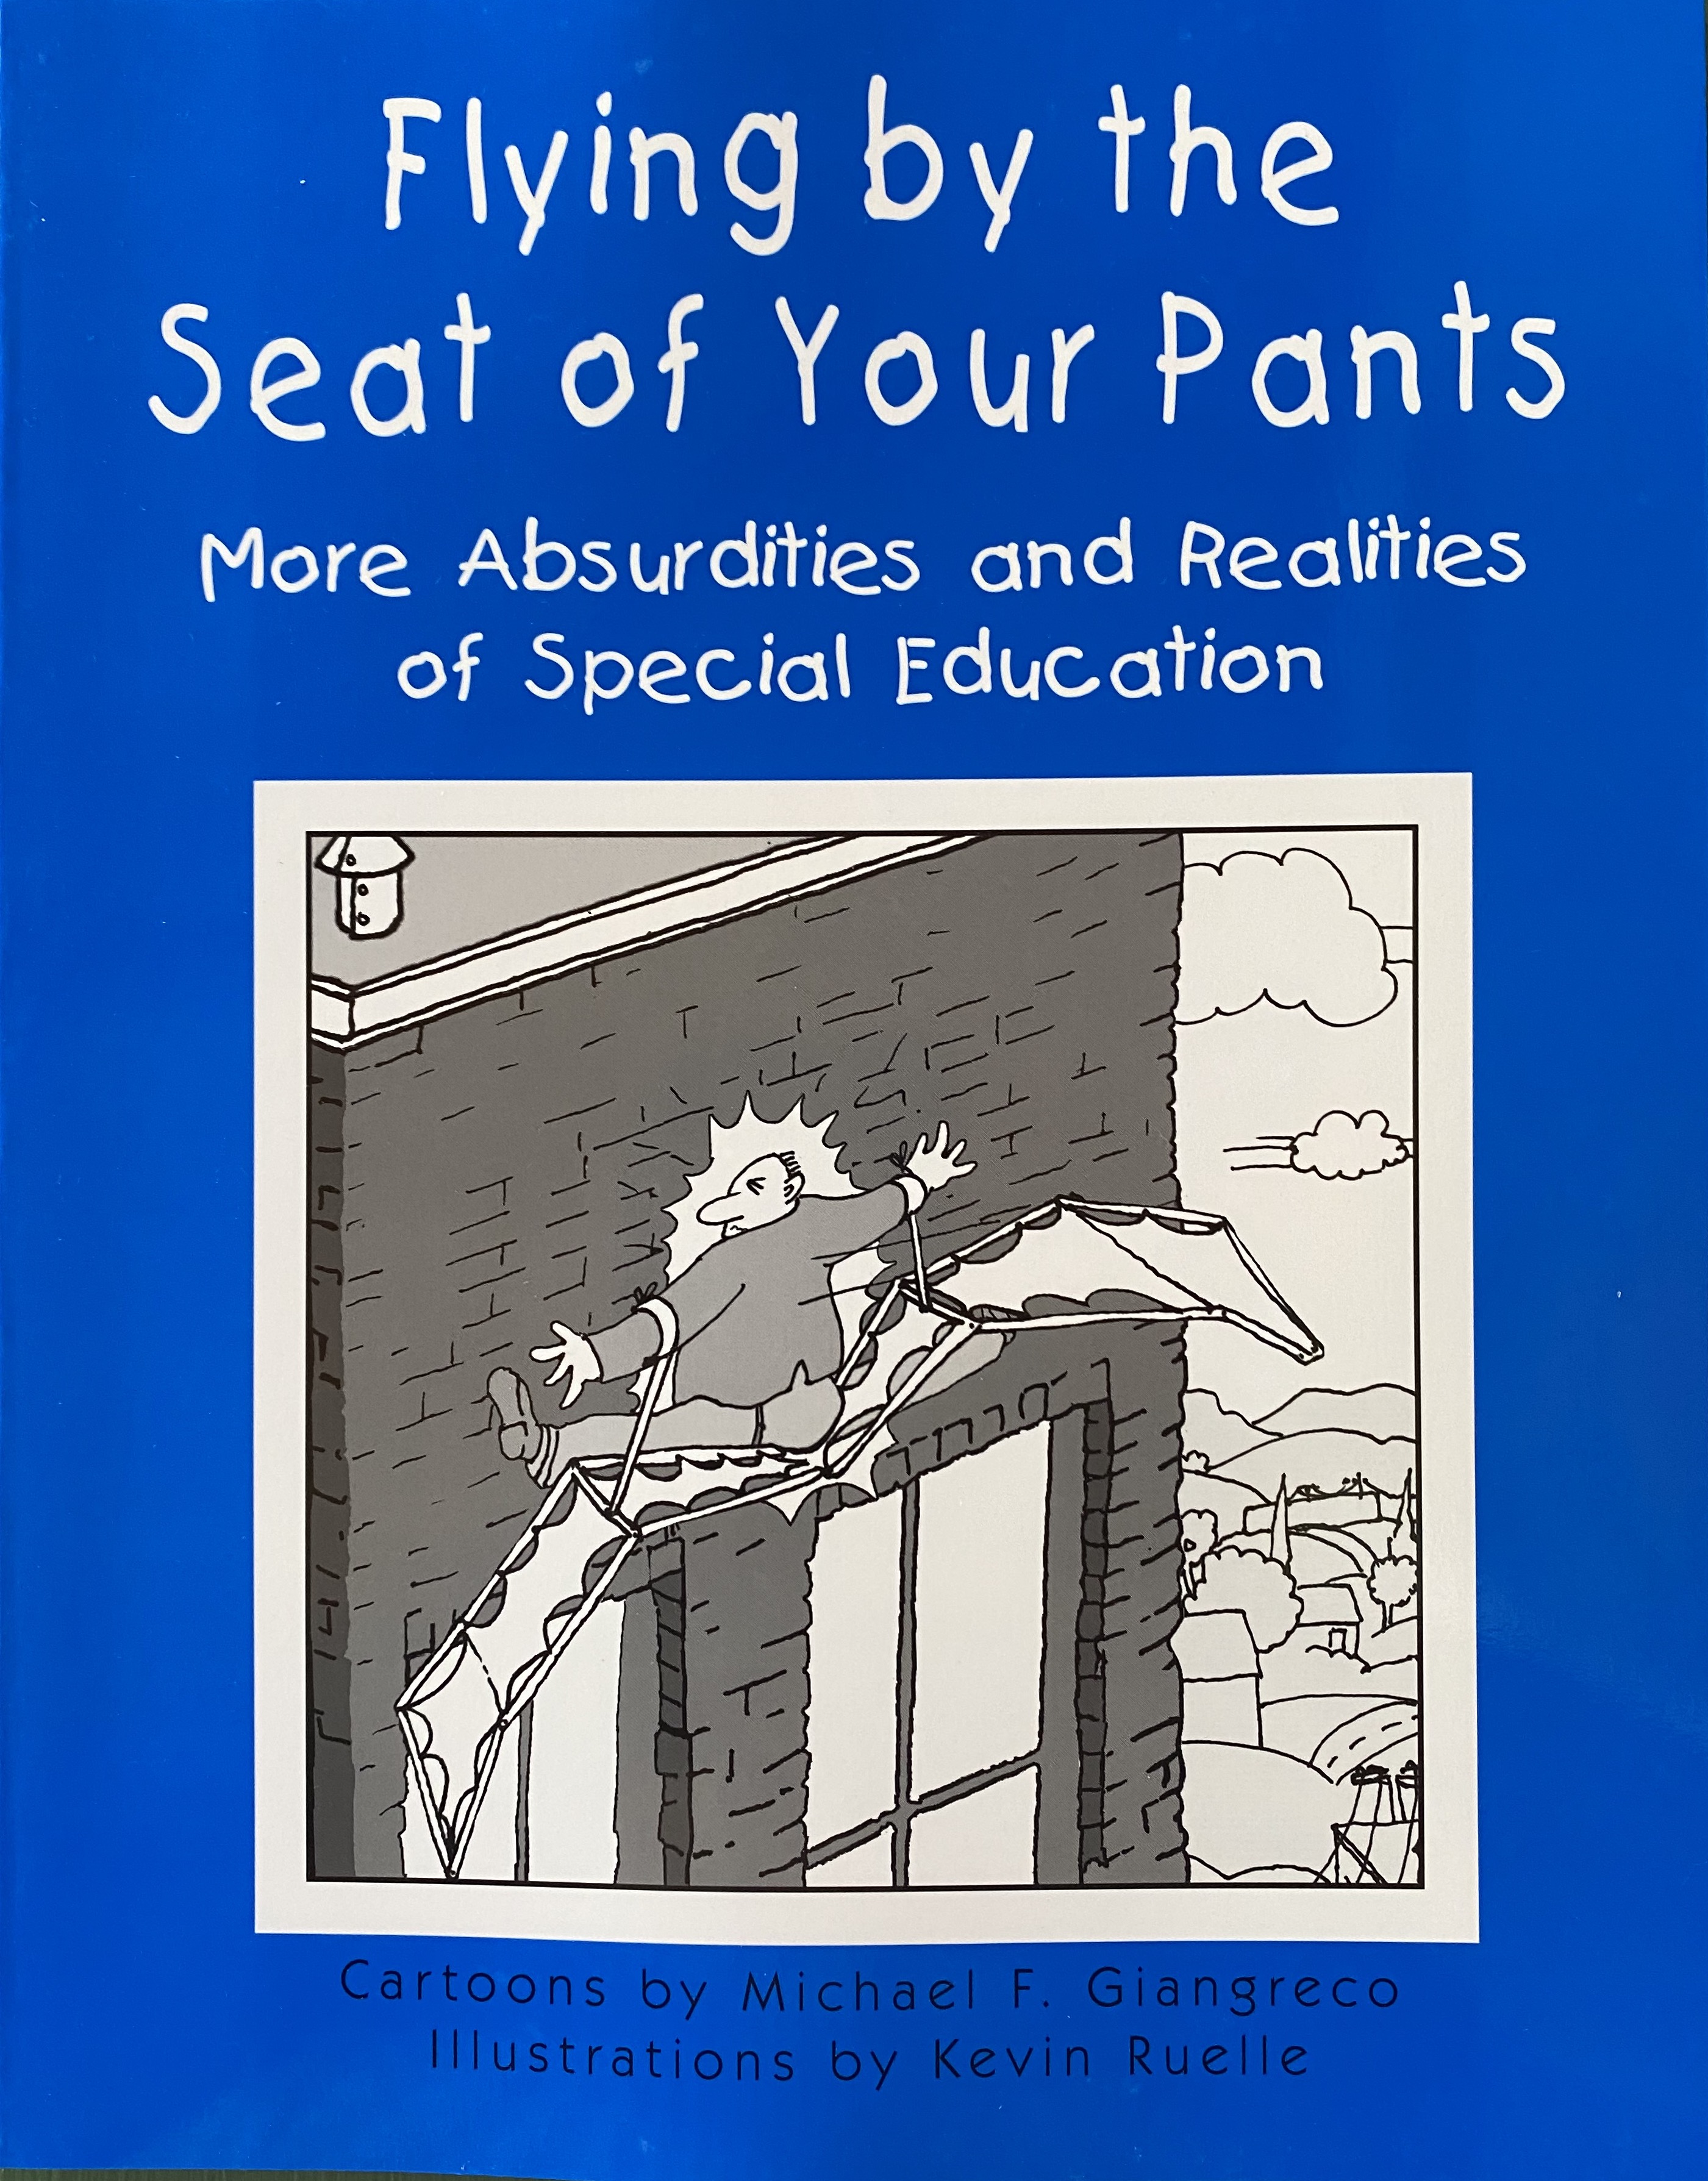 2. Flying by the Seat of Your Pants